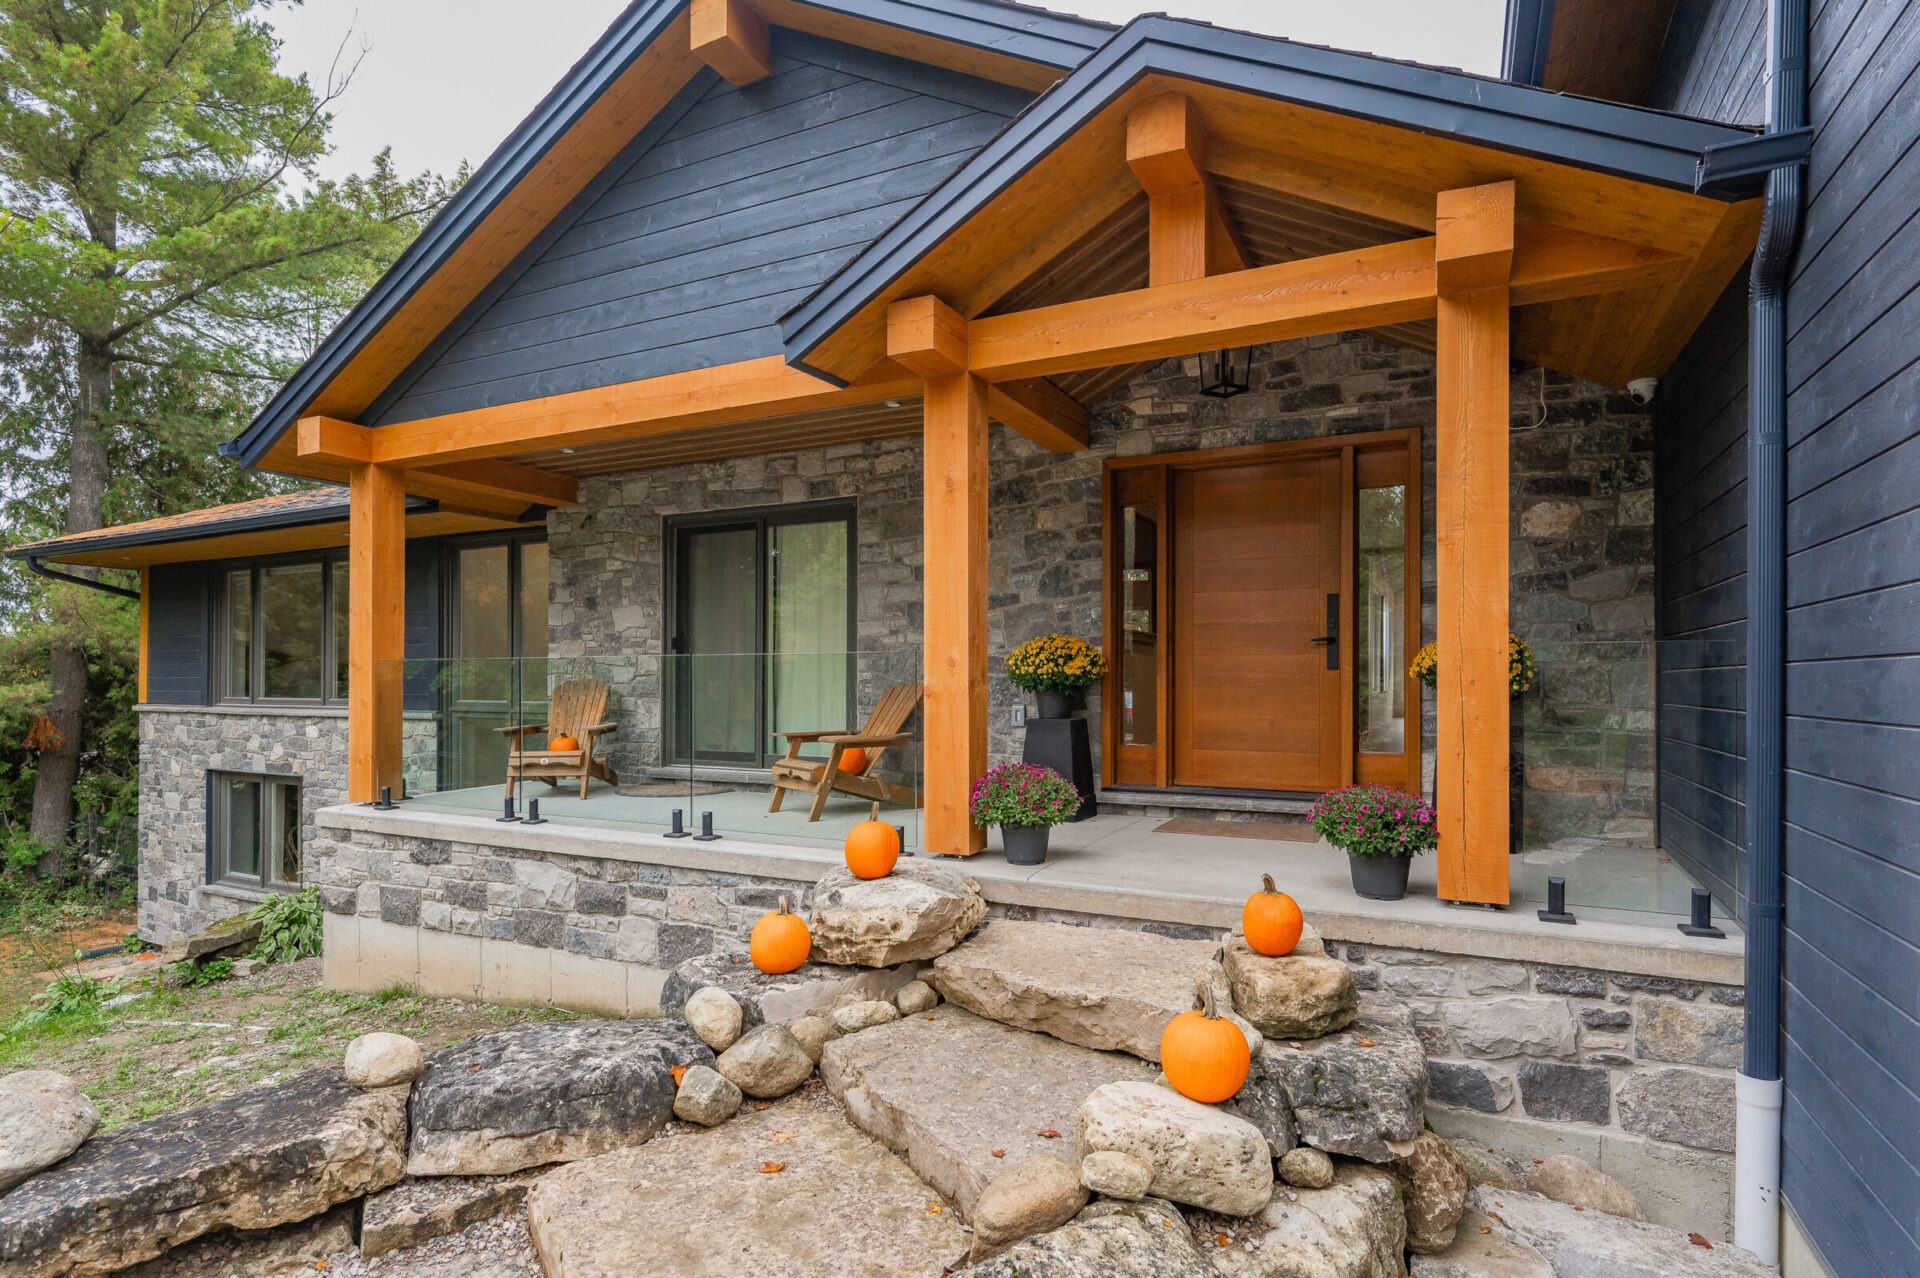 A modern house with a blue-grey exterior, wooden beams, a stone foundation, and steps decorated with pumpkins and potted flowers, indicating autumn.